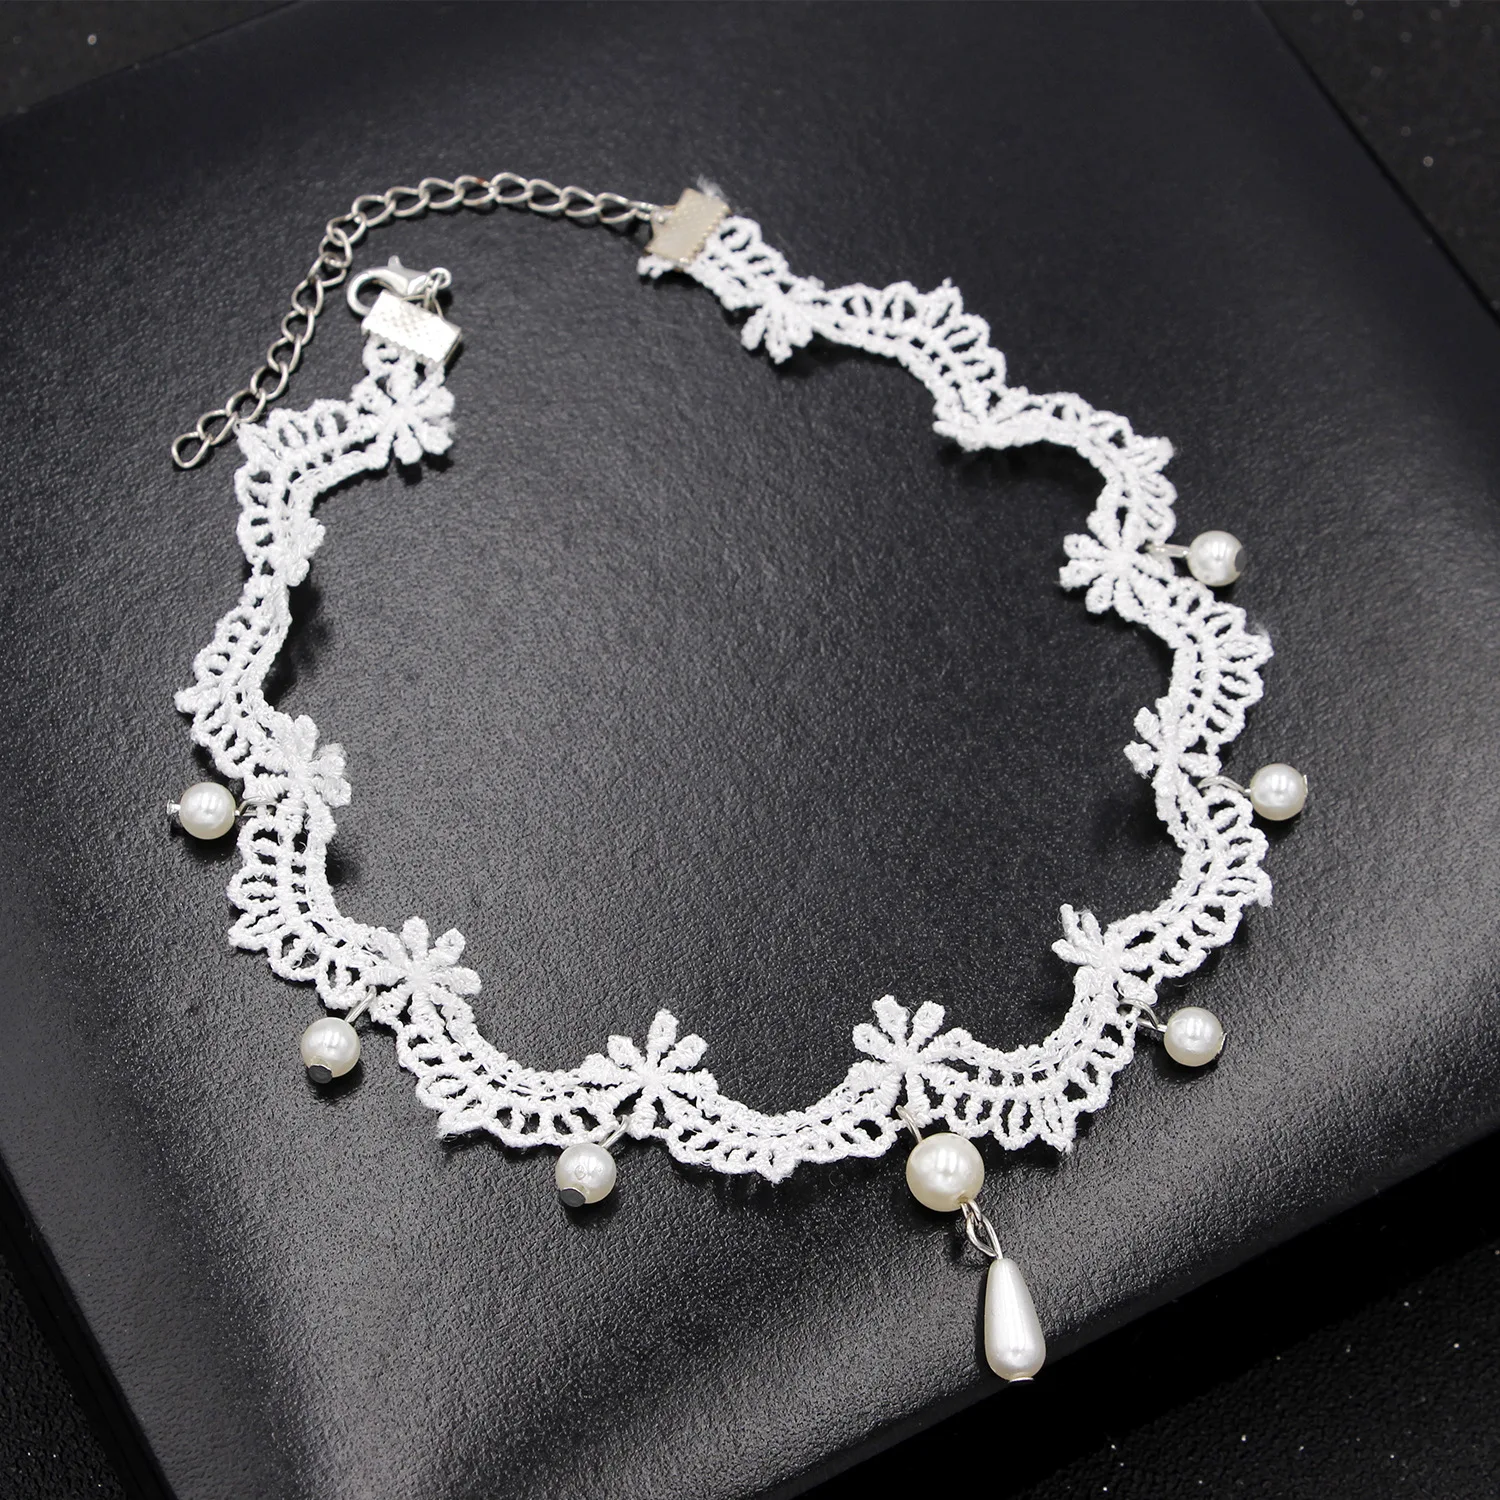 White Lace Applique Crocheted  Choker with Pearl Pendant Vintage Flower Pattern Collar Necklace for Women and Girls LL@17 images - 6